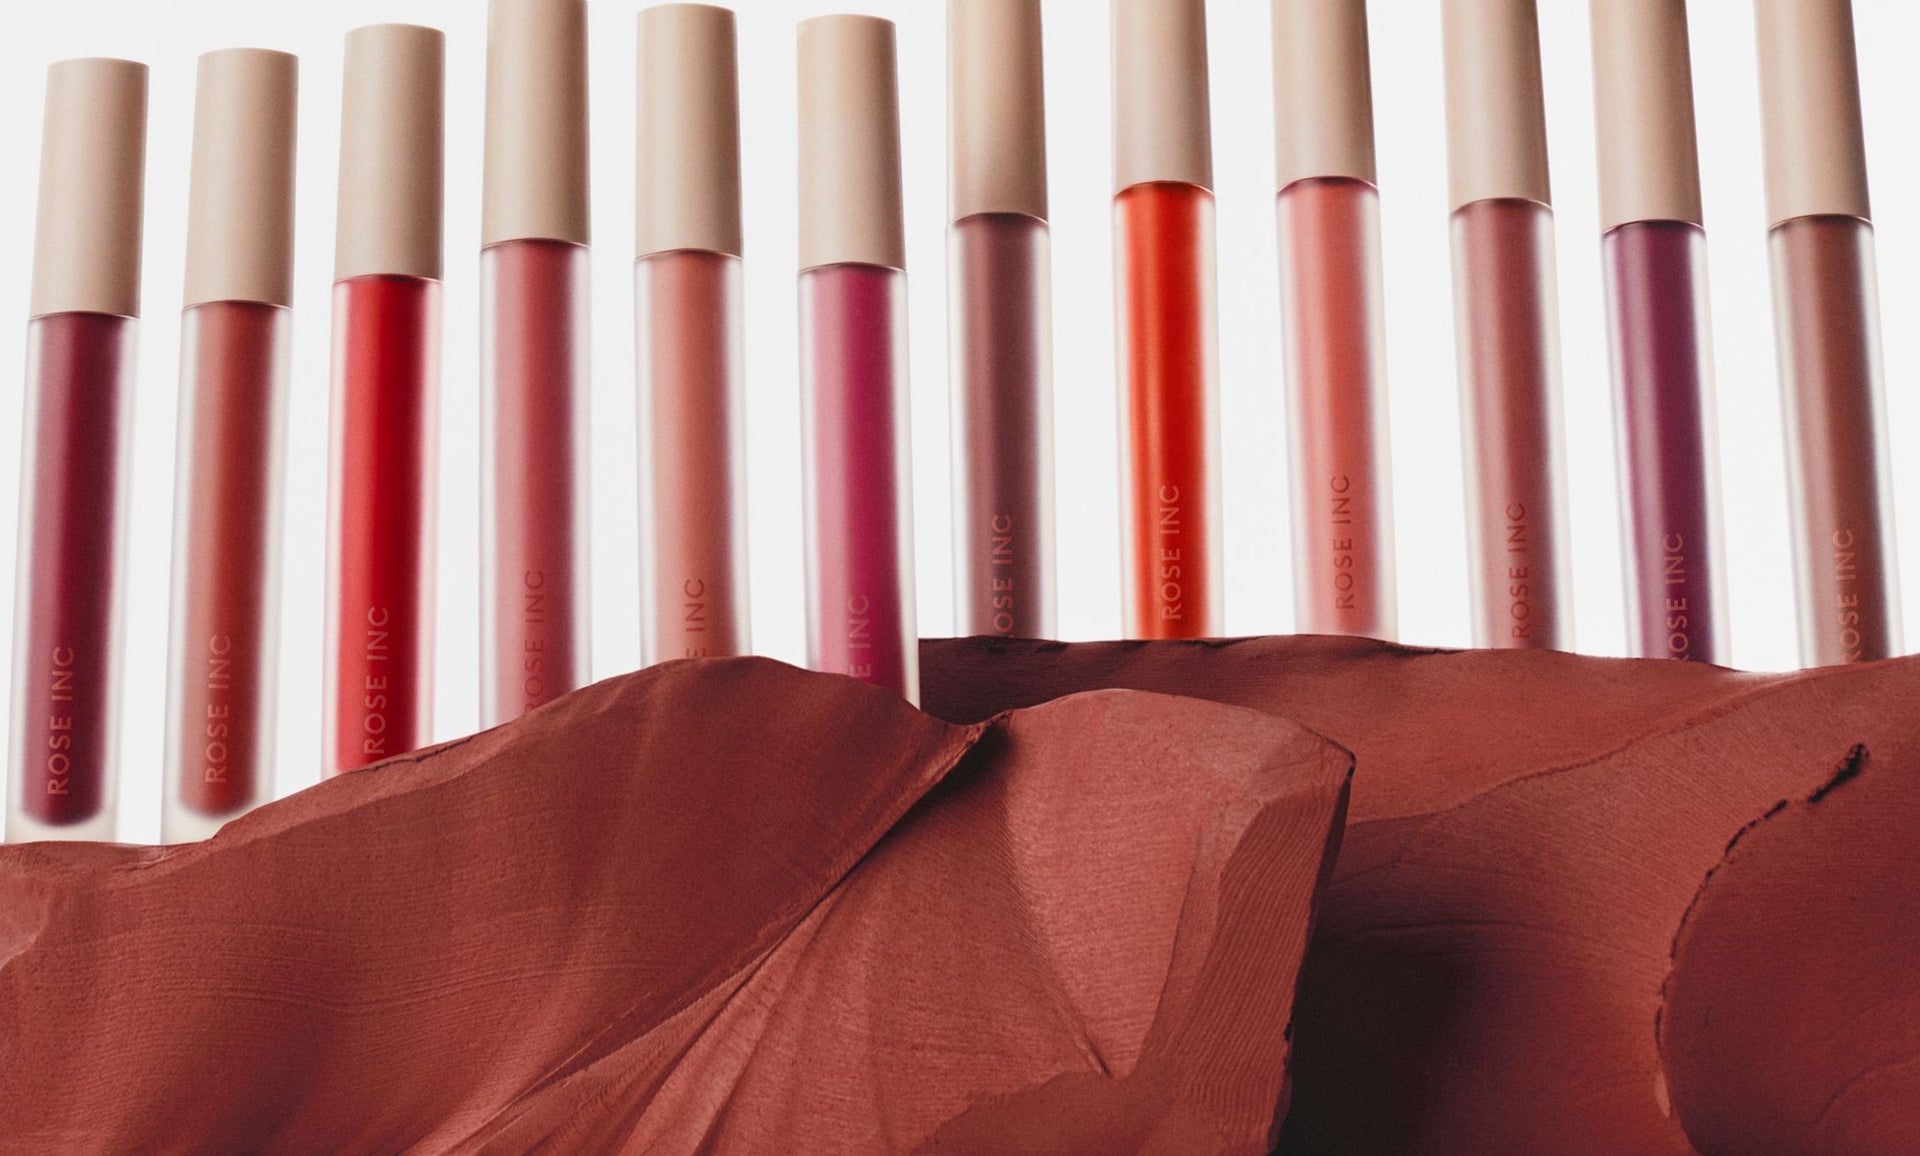 How to Wear the New Lip Cream Shades